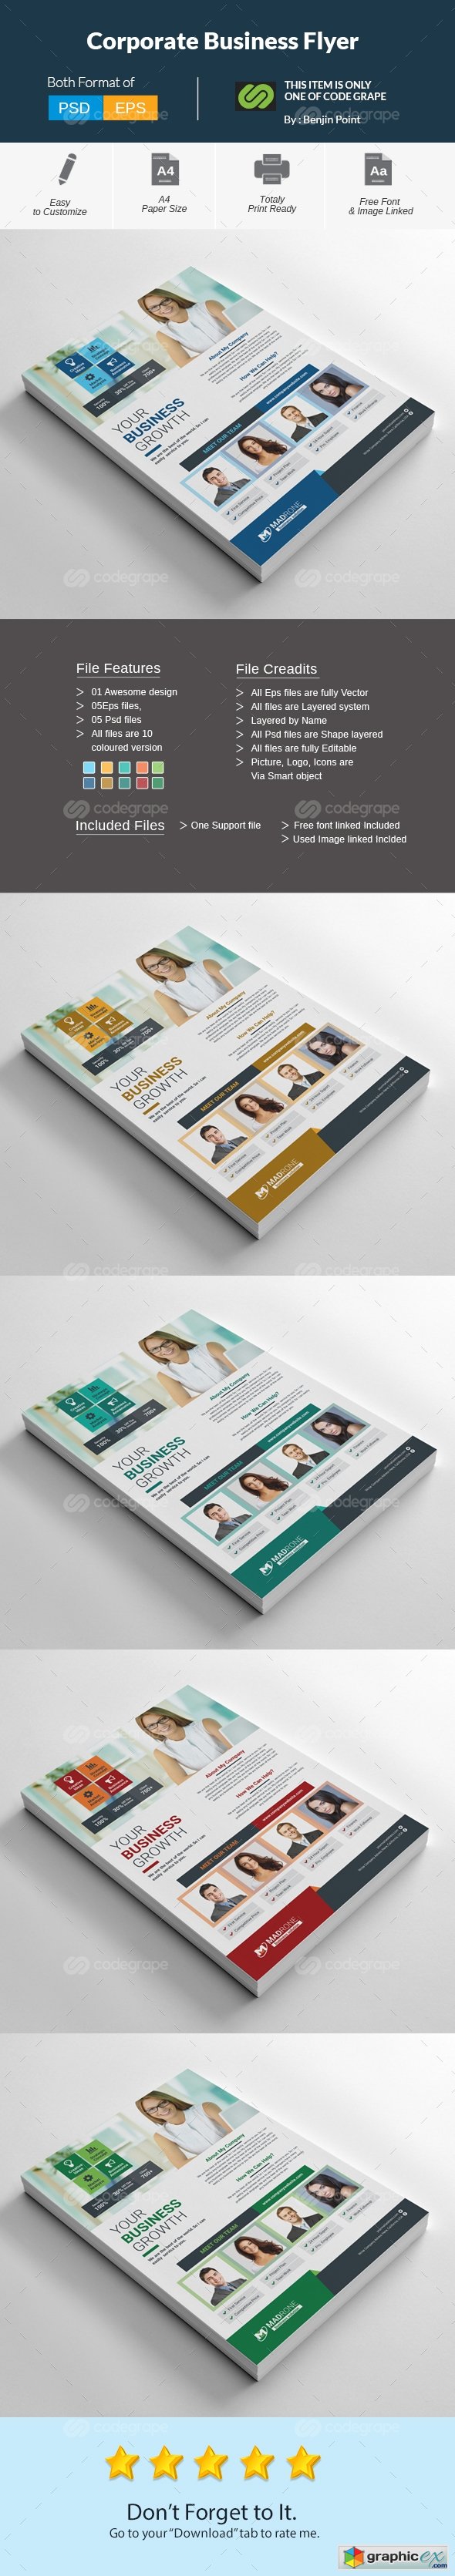 Corporate Business Flyer 9831